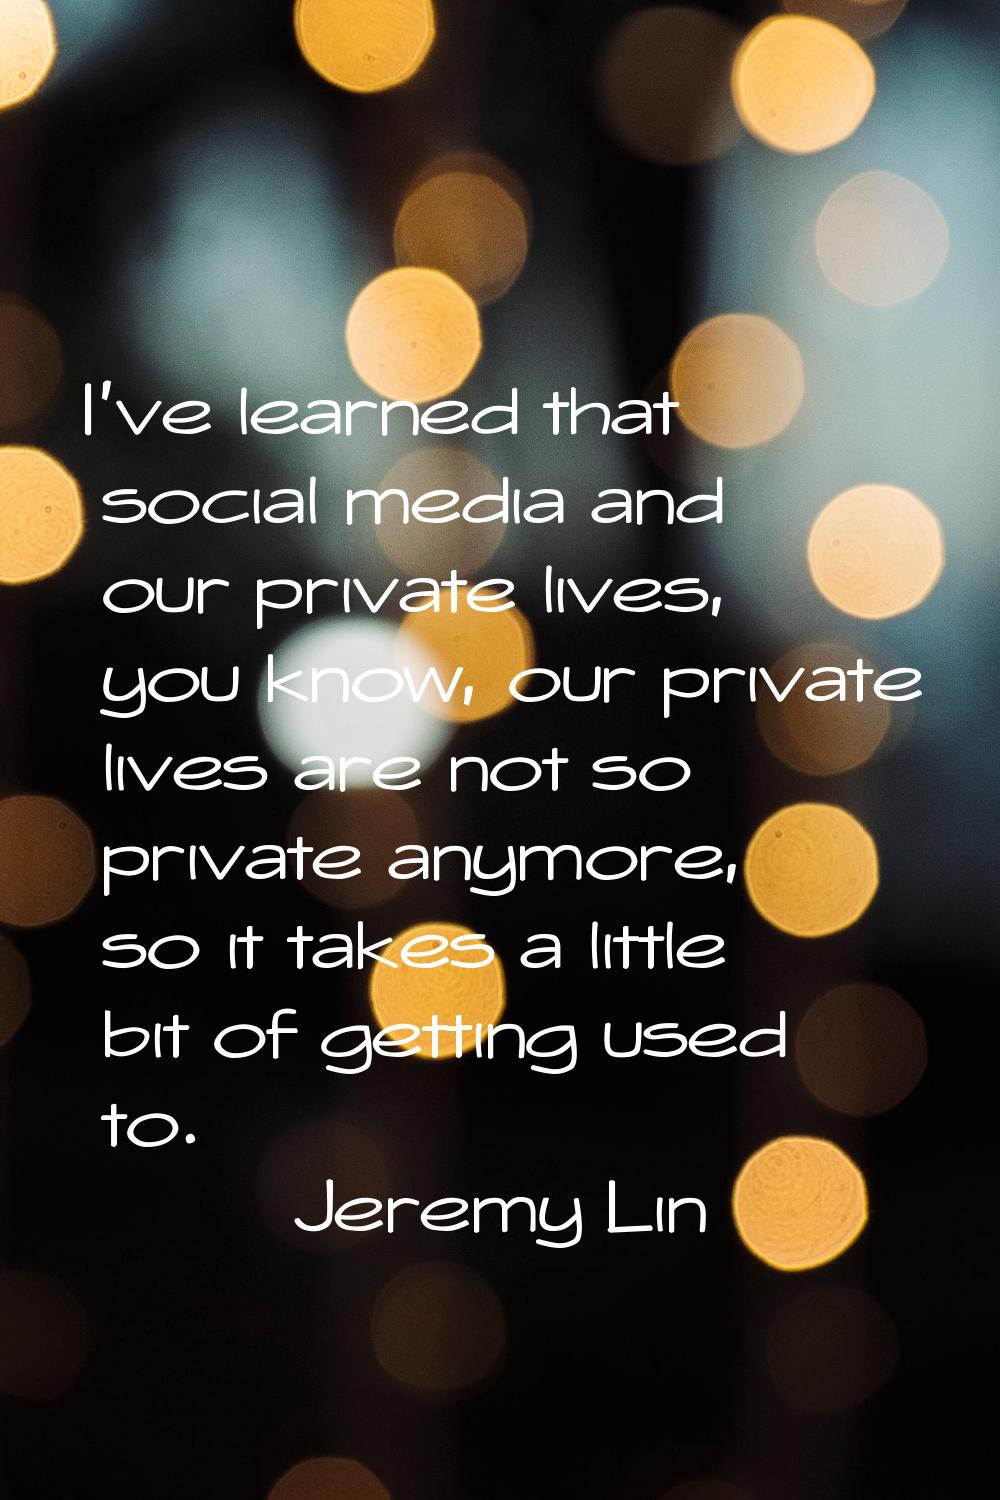 I've learned that social media and our private lives, you know, our private lives are not so privat